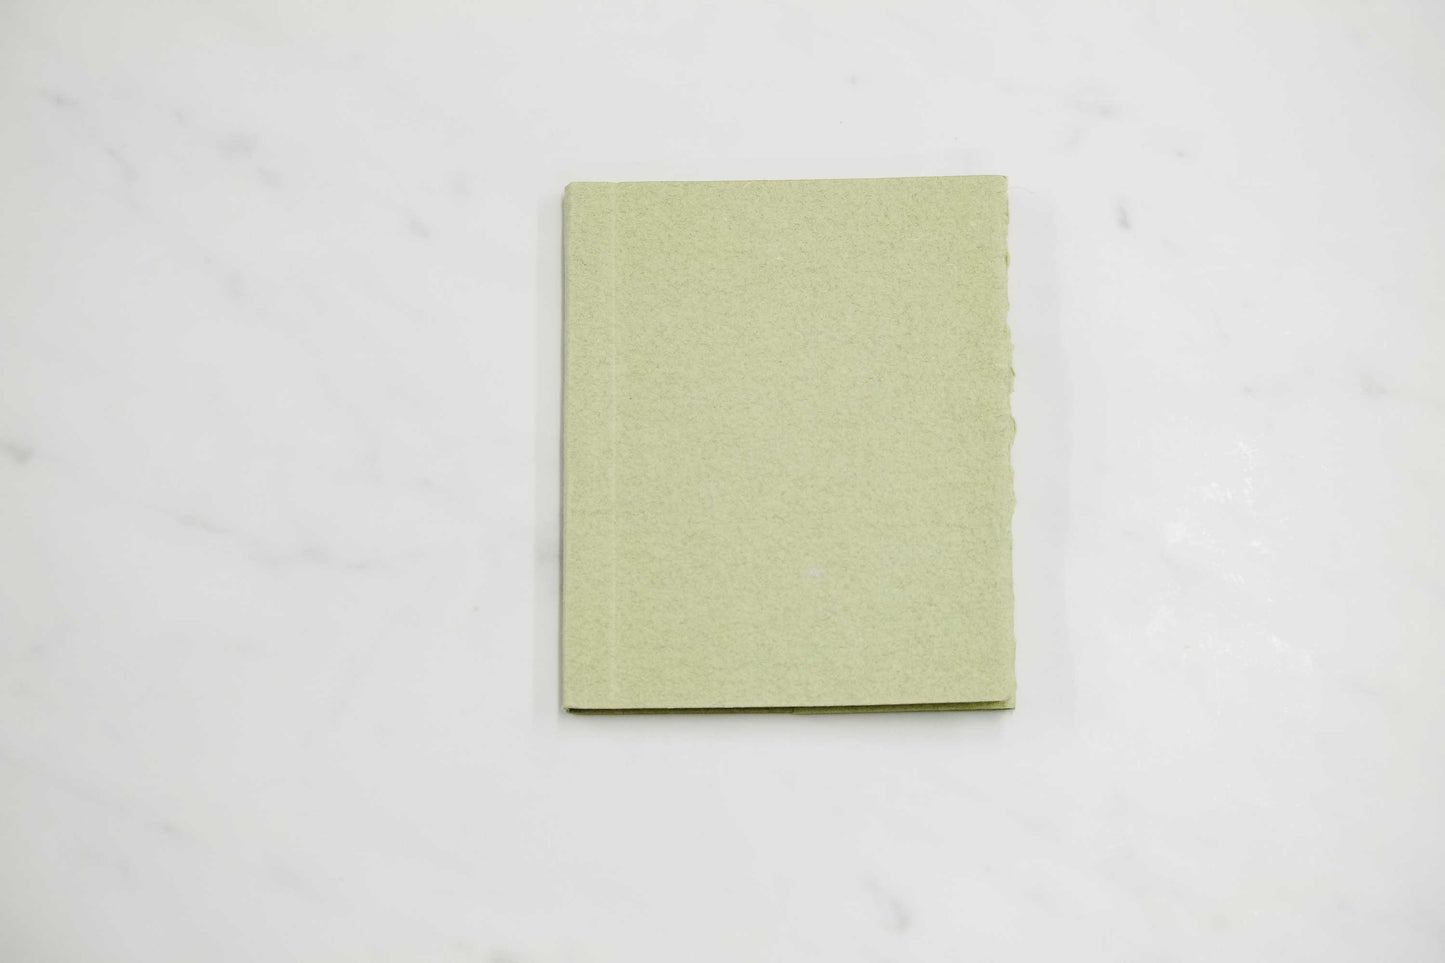 Mini 5 1/4-inch by 4 1/4-inch handmade Papeterie St. Armand cotton paper notepad with pale green cover